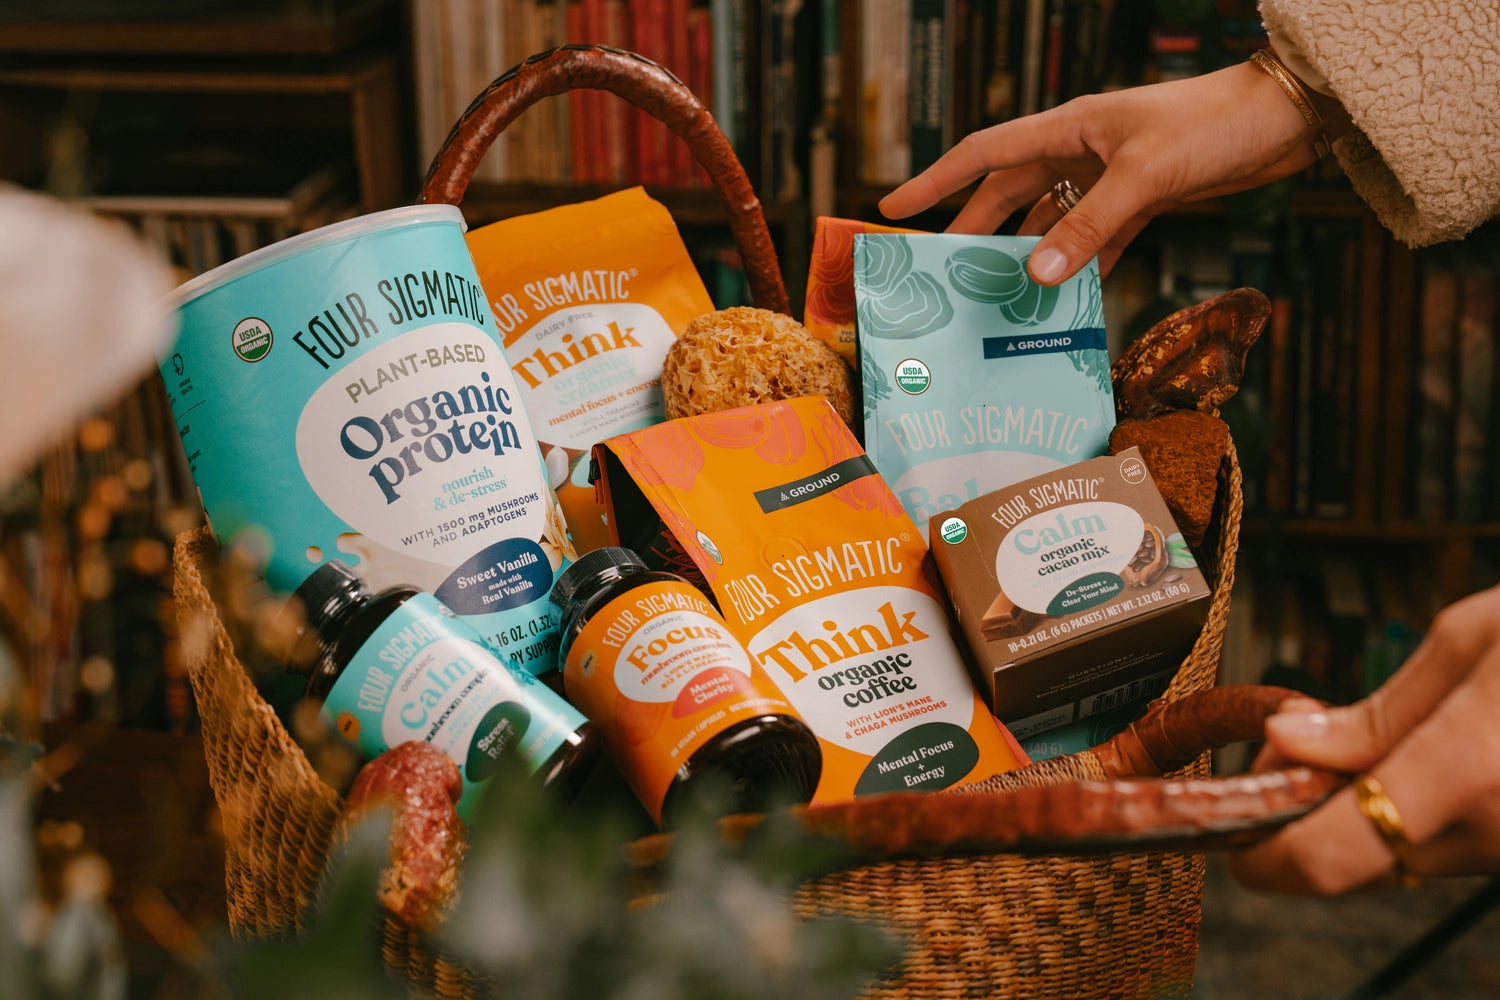 A basket filled with various Four Sigmatic health food products.